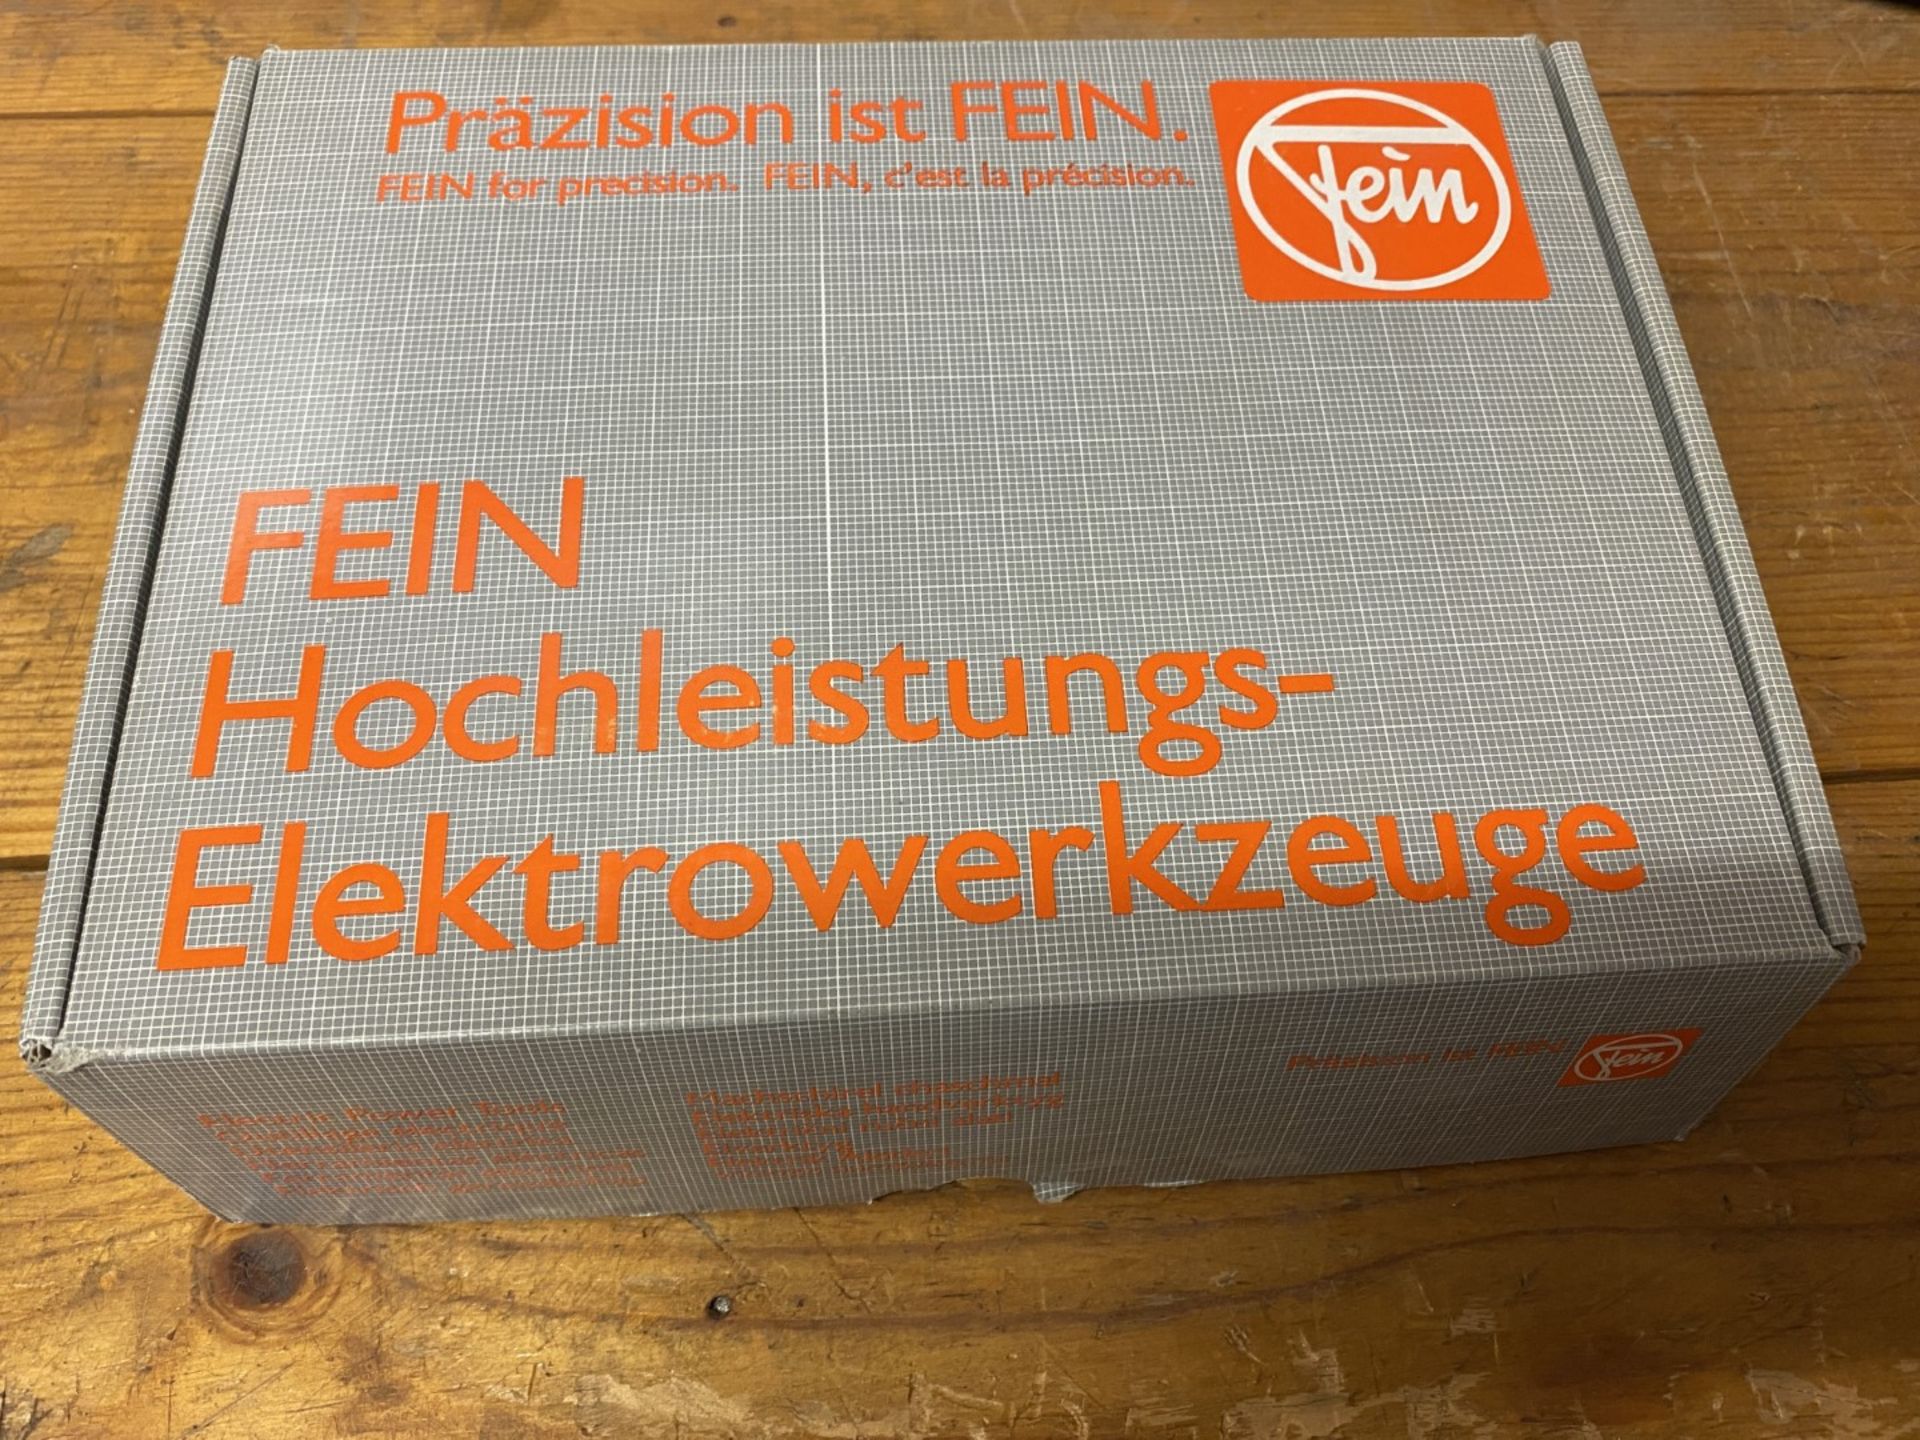 Fein electric screwdriver with battery - NOT TESTED